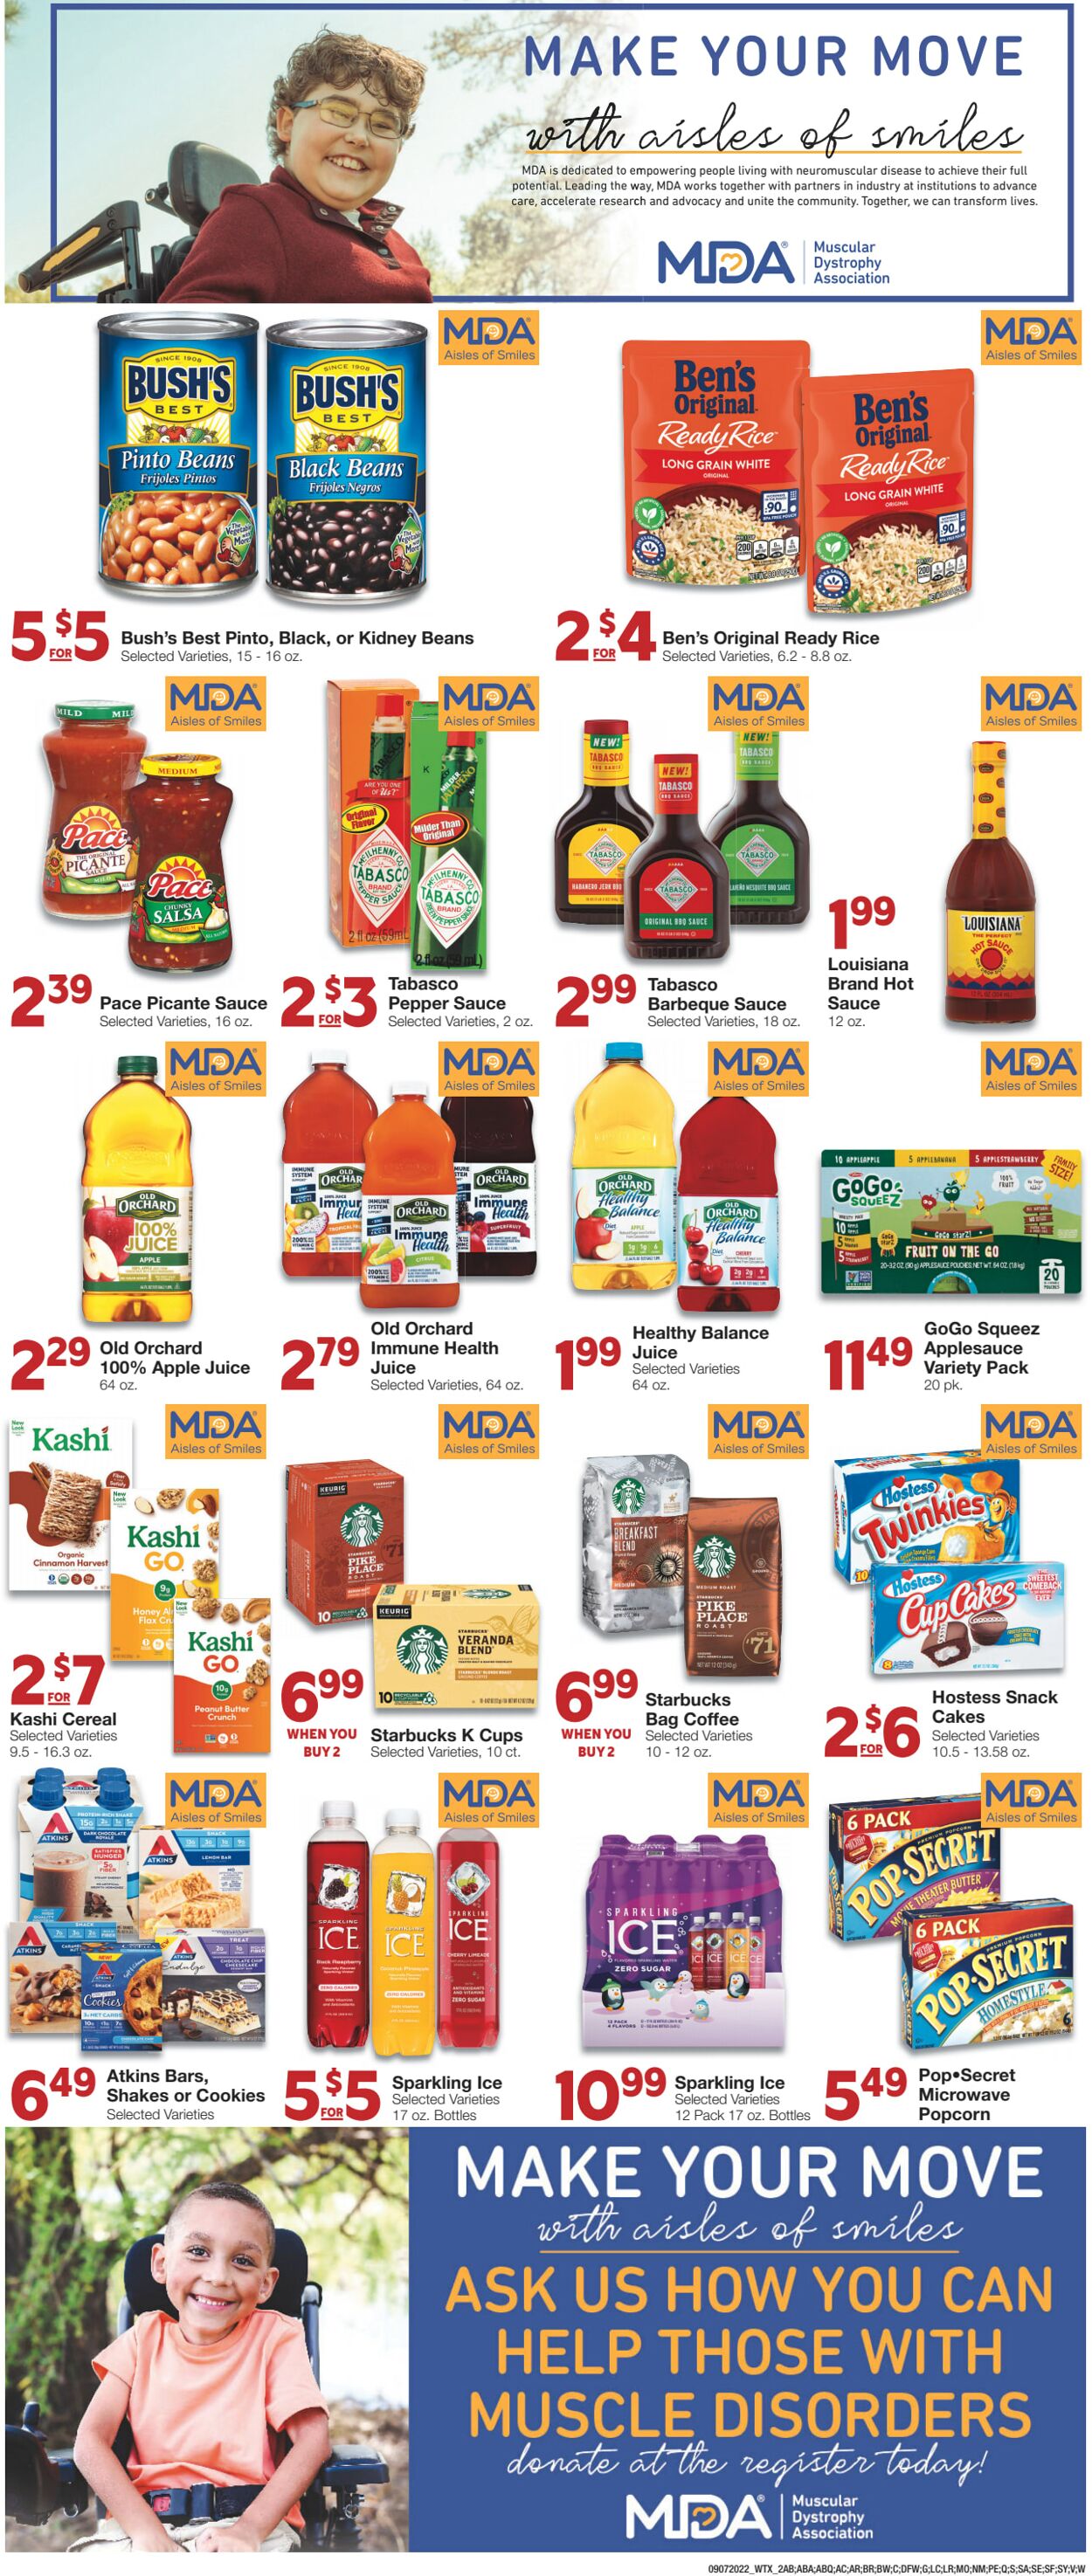 Weekly ad United Supermarkets 09/07/2022 - 09/13/2022